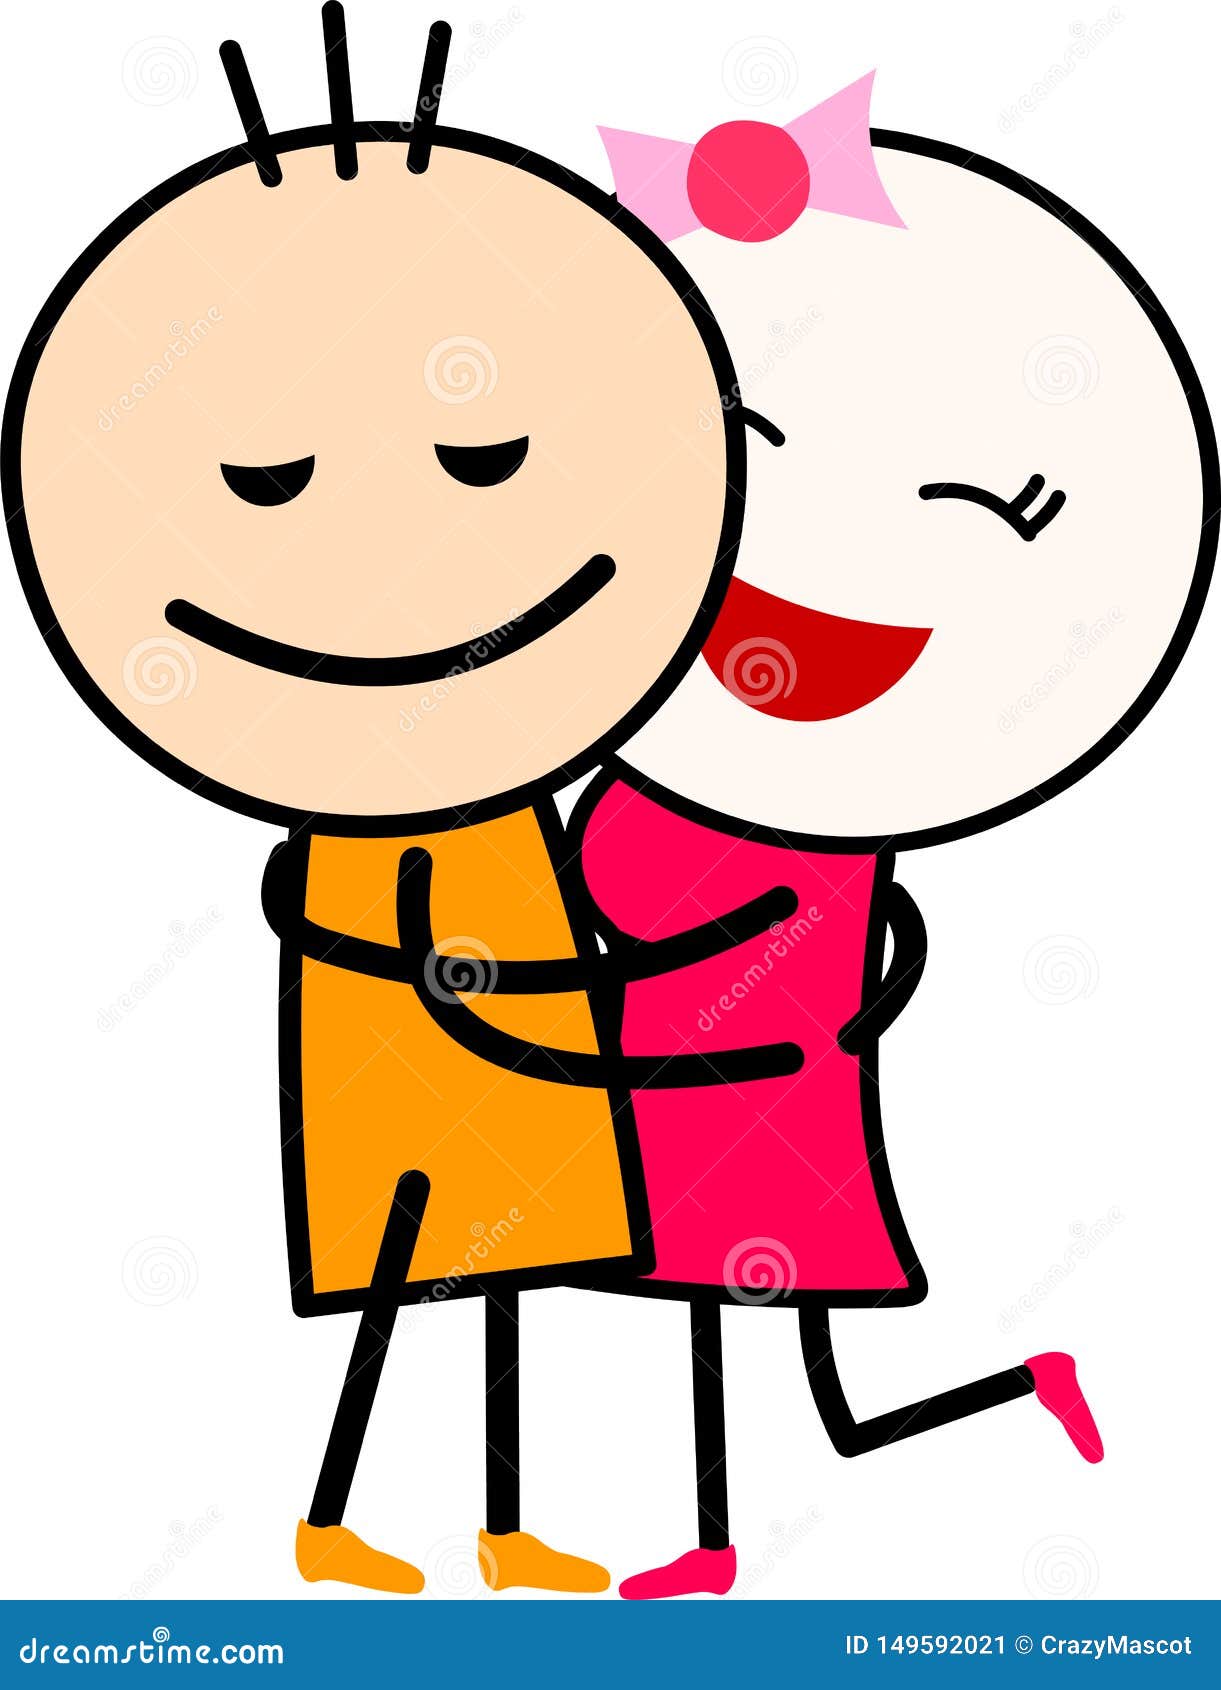 A Cute Cartoon Love Couple Hugging Each Other. Stock Vector - Illustration  of drawing, funny: 149592021